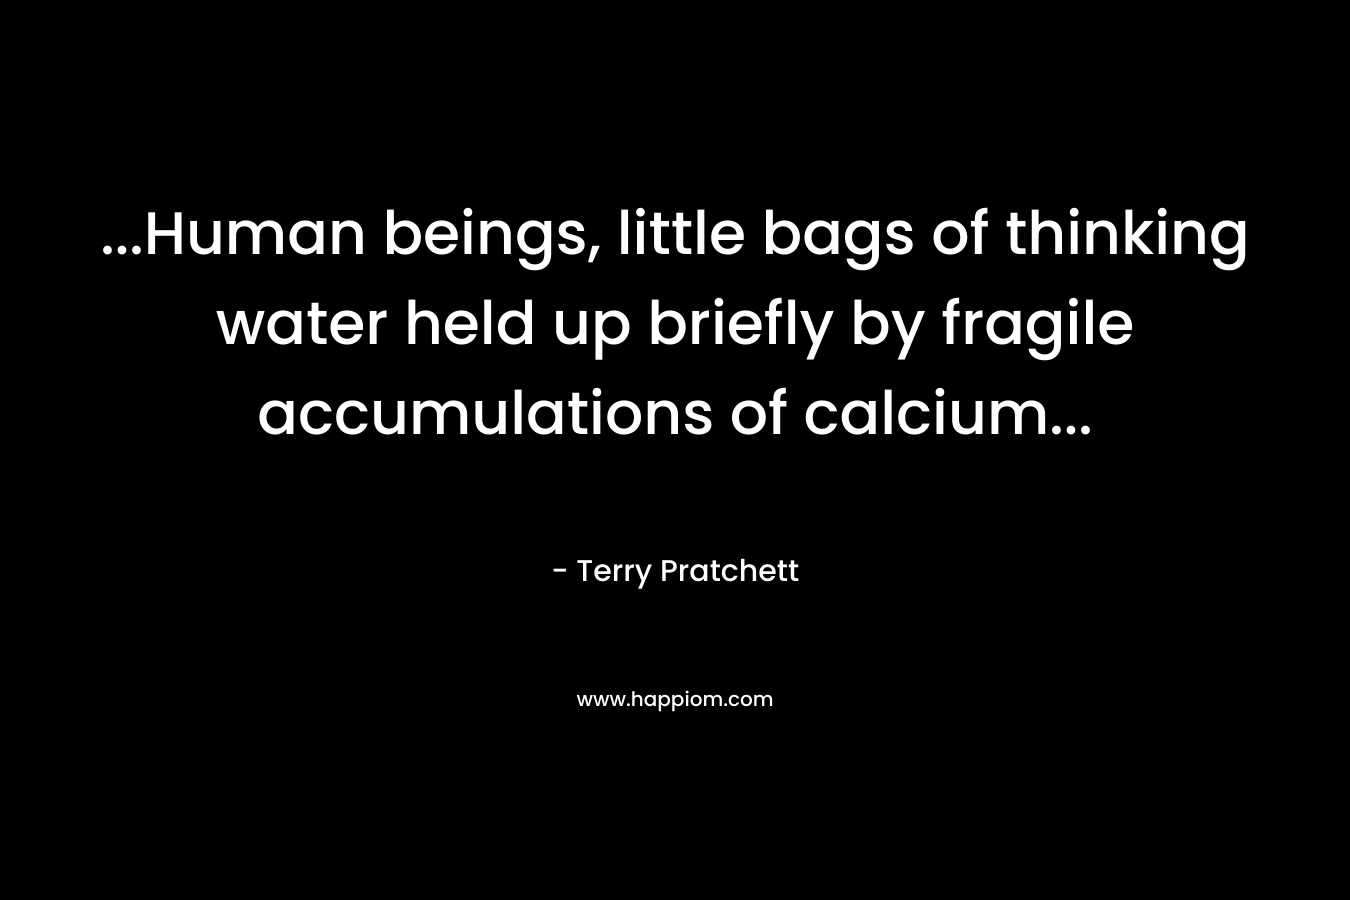 ...Human beings, little bags of thinking water held up briefly by fragile accumulations of calcium...